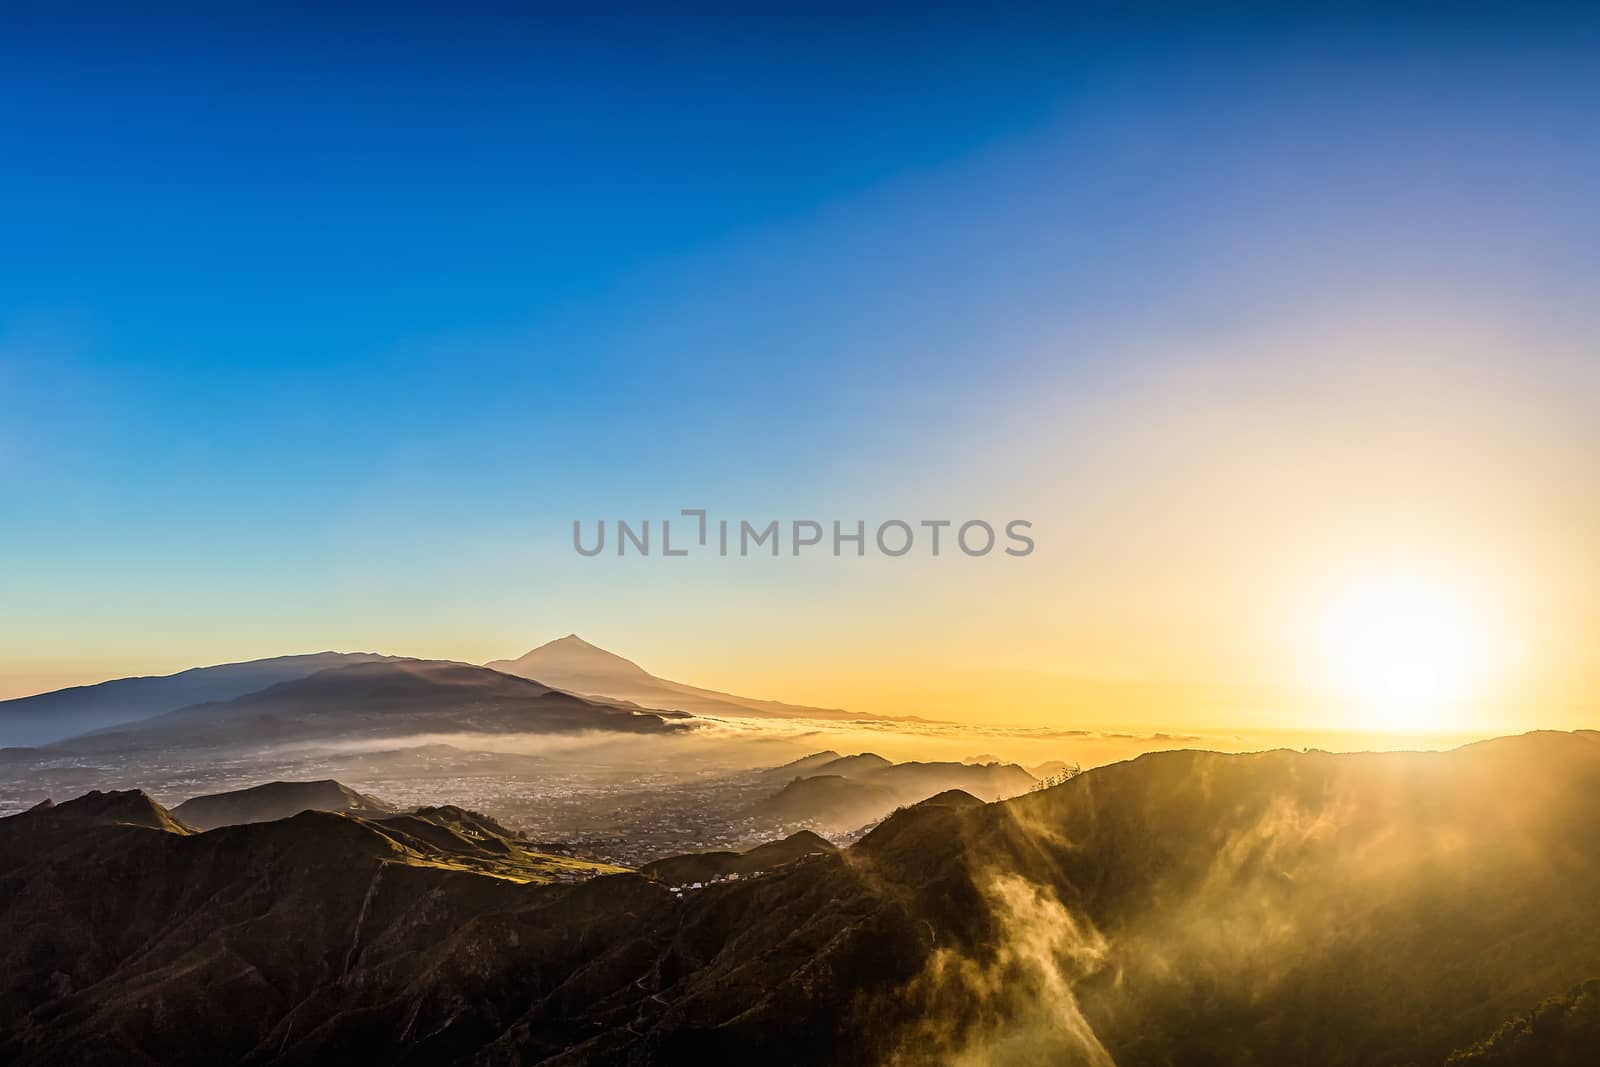 Sun with sunlight over mountains on blue sky and clouds with haze and Teide volcano on background at evening sunset in Tenerife Canary island, Spain at spring or summer